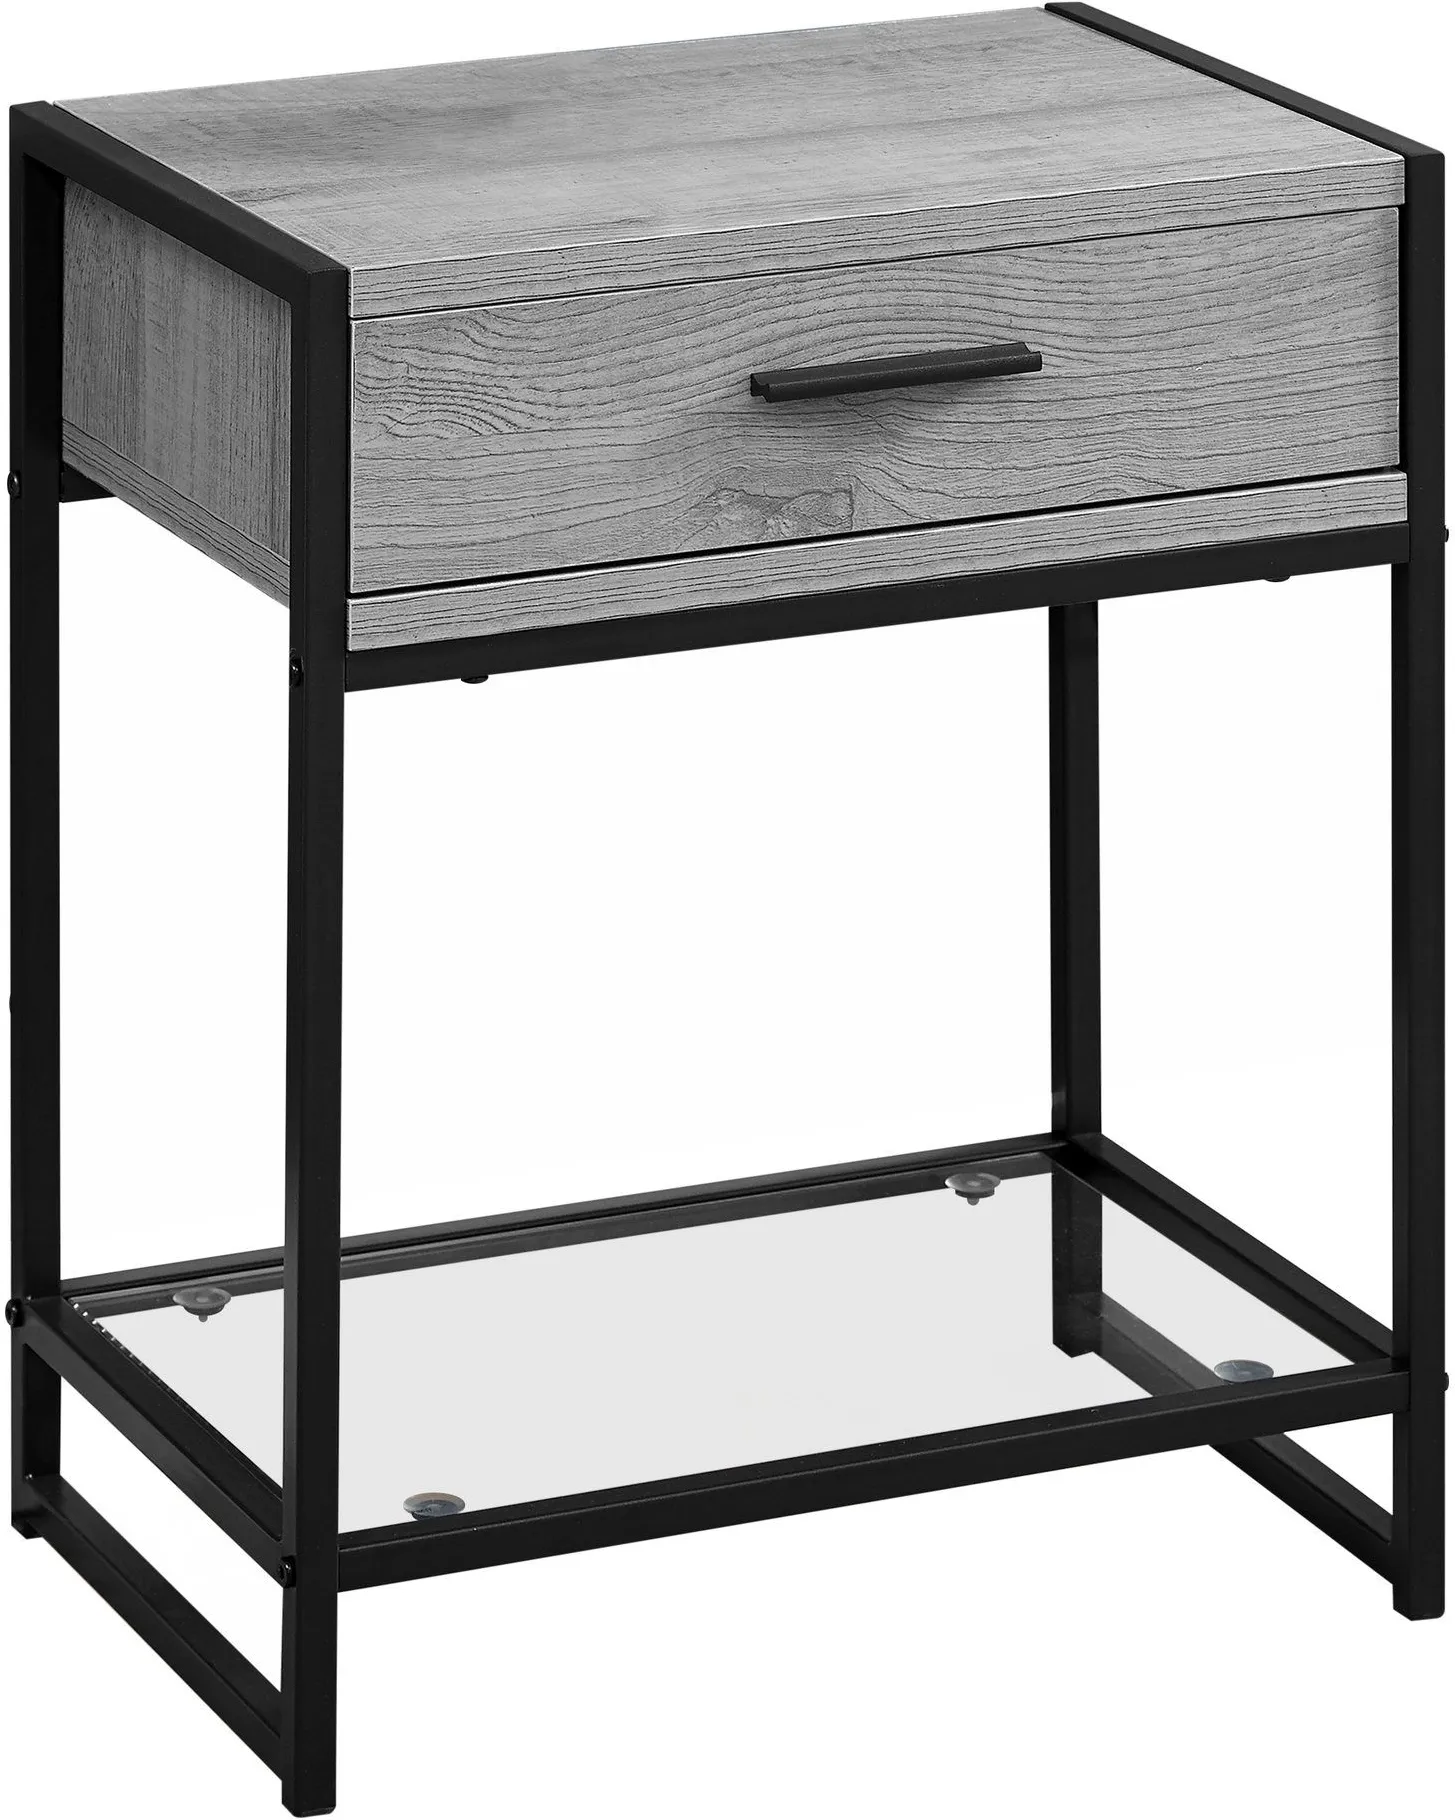 Accent Table, Side, End, Nightstand, Lamp, Storage Drawer, Living Room, Bedroom, Metal, Laminate, Tempered Glass, Grey, Black, Contemporary, Modern